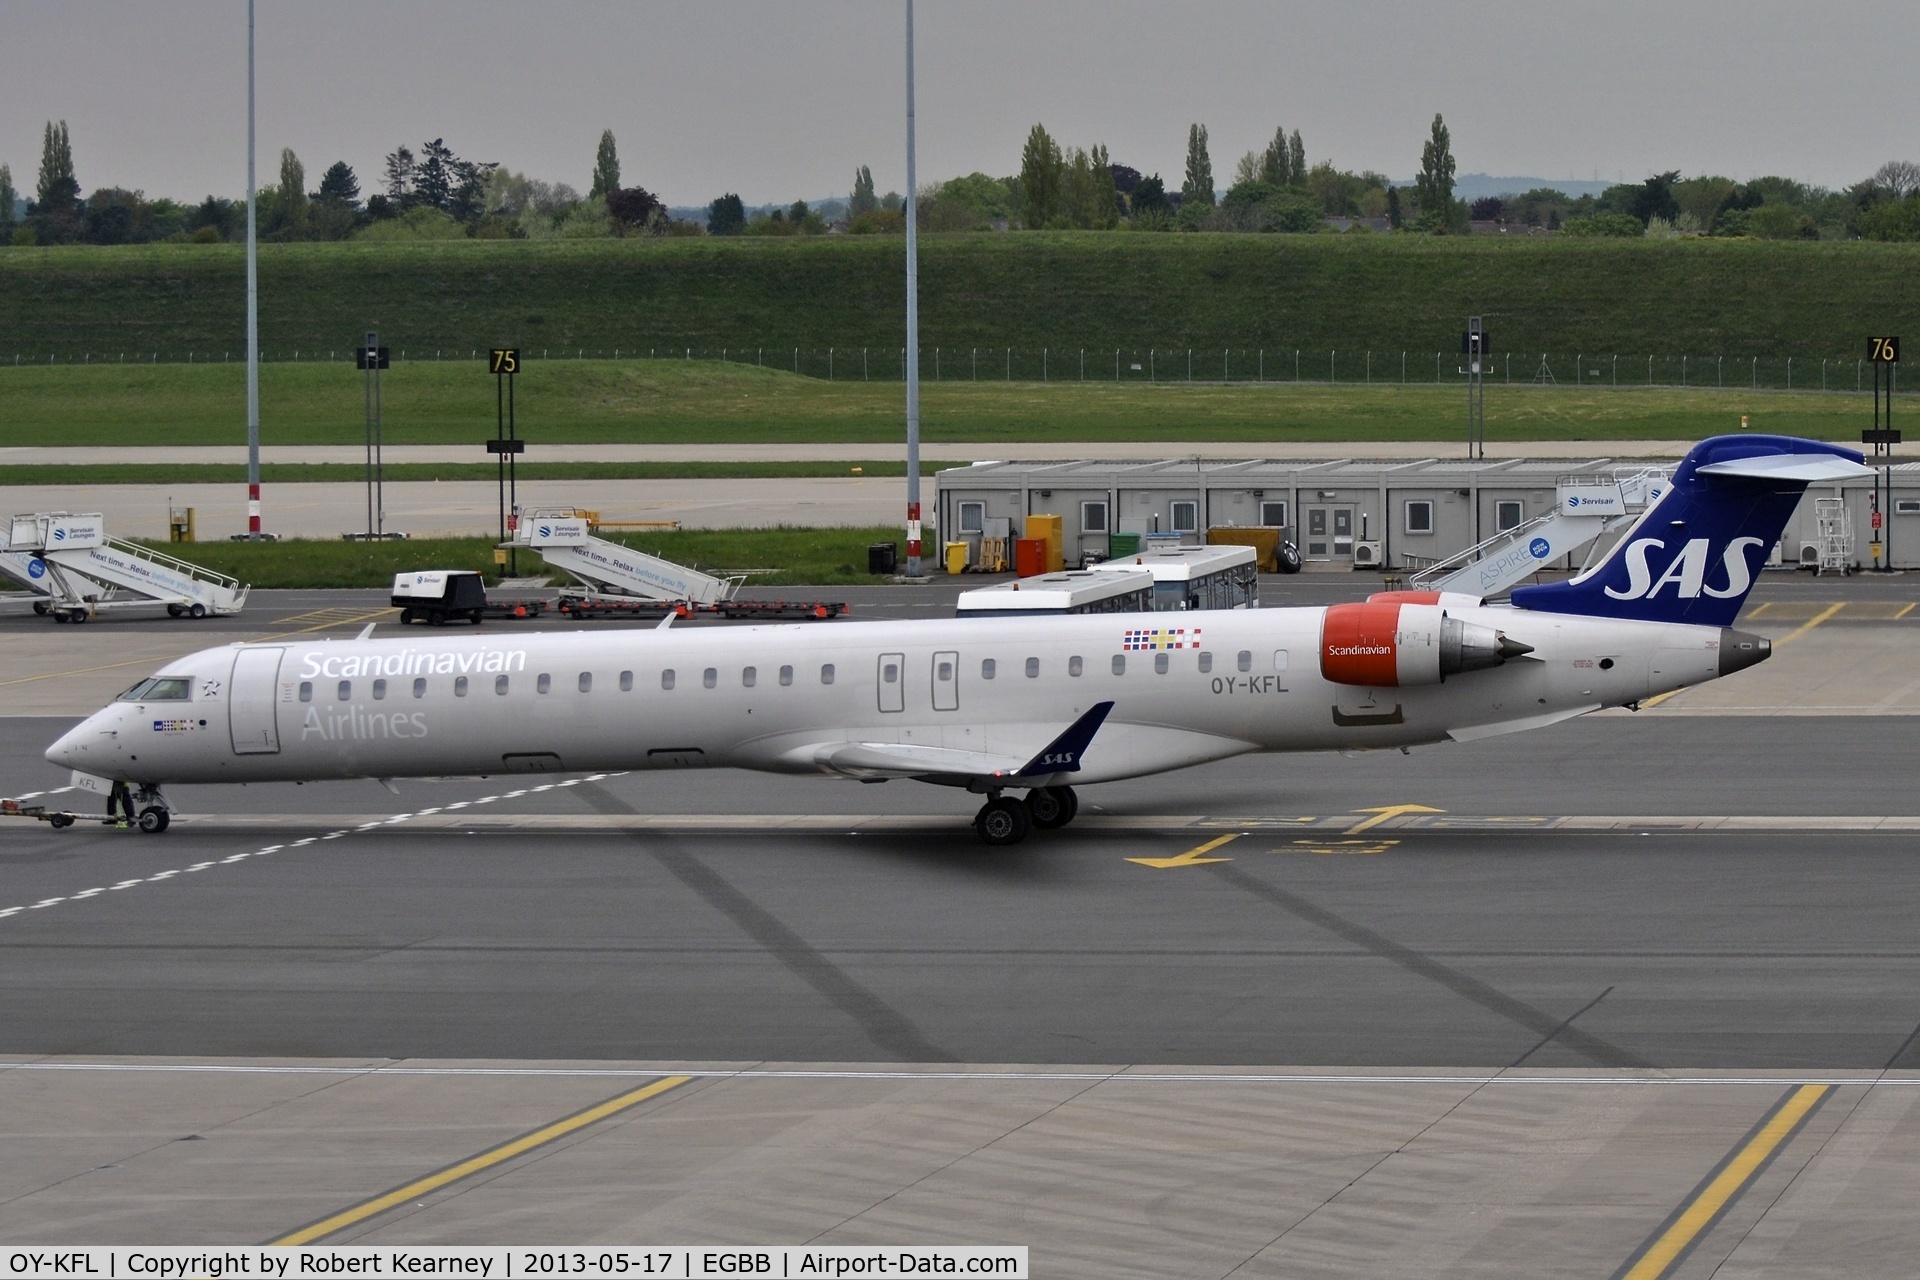 OY-KFL, 2009 Bombardier CRJ-900 NG (CL-600-2D24) C/N 15246, Pushing back prior to departure